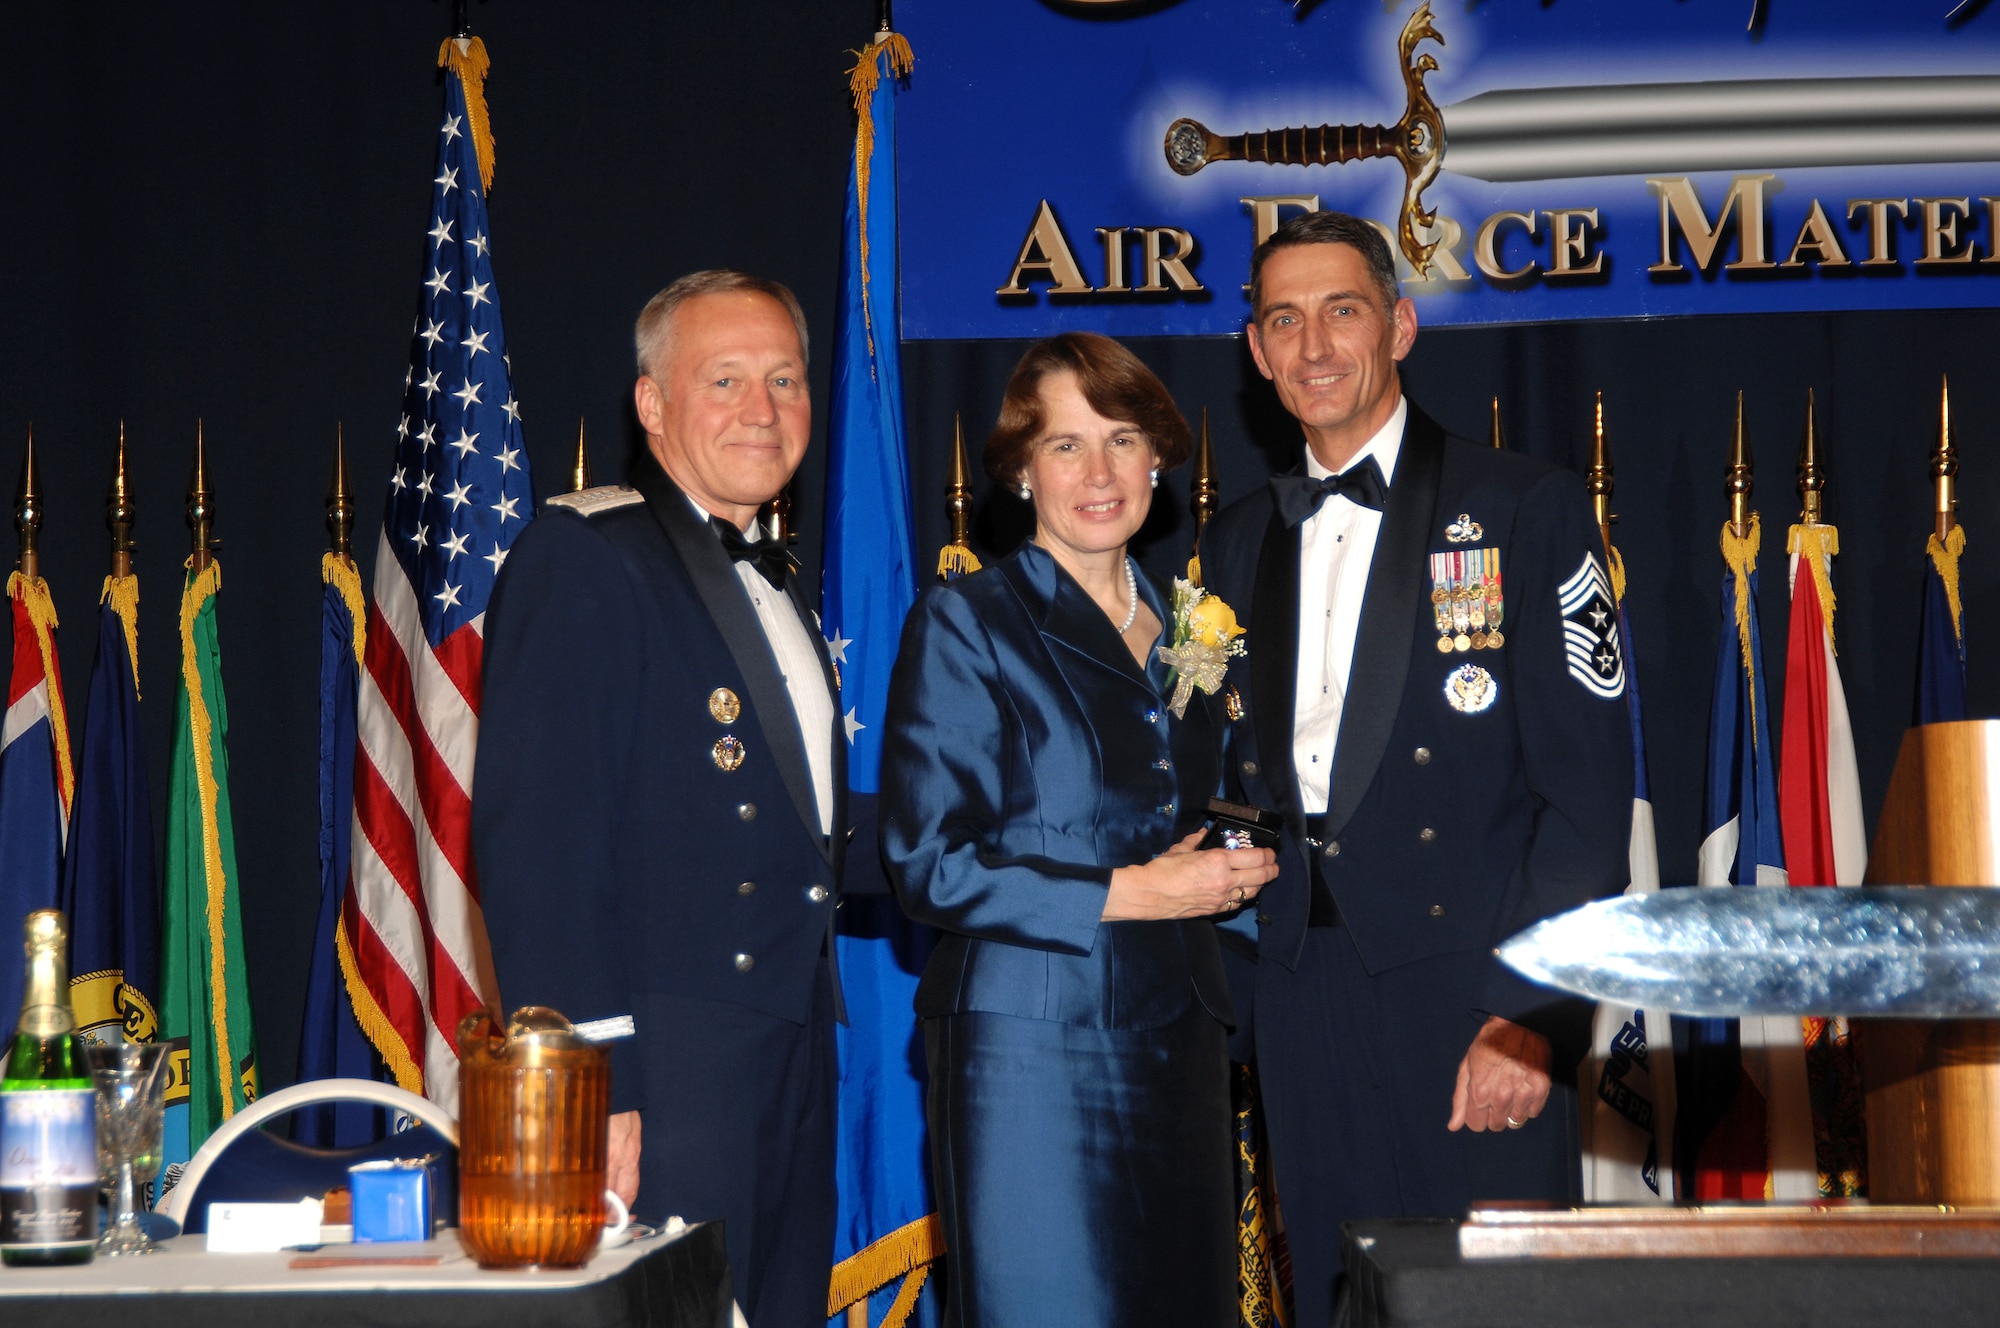 Gen. Bruce Carlson (left), is joined by his wife, Vicki, and the former AFMC command chief, Chief Master Sgt. Jonathan Hake, during General Carlson’s Order of the Sword ceremony. The event took place at the National Museum of the U.S. Air Force on Dec. 6, 2007. (Air Force photo by Ben Strasser)